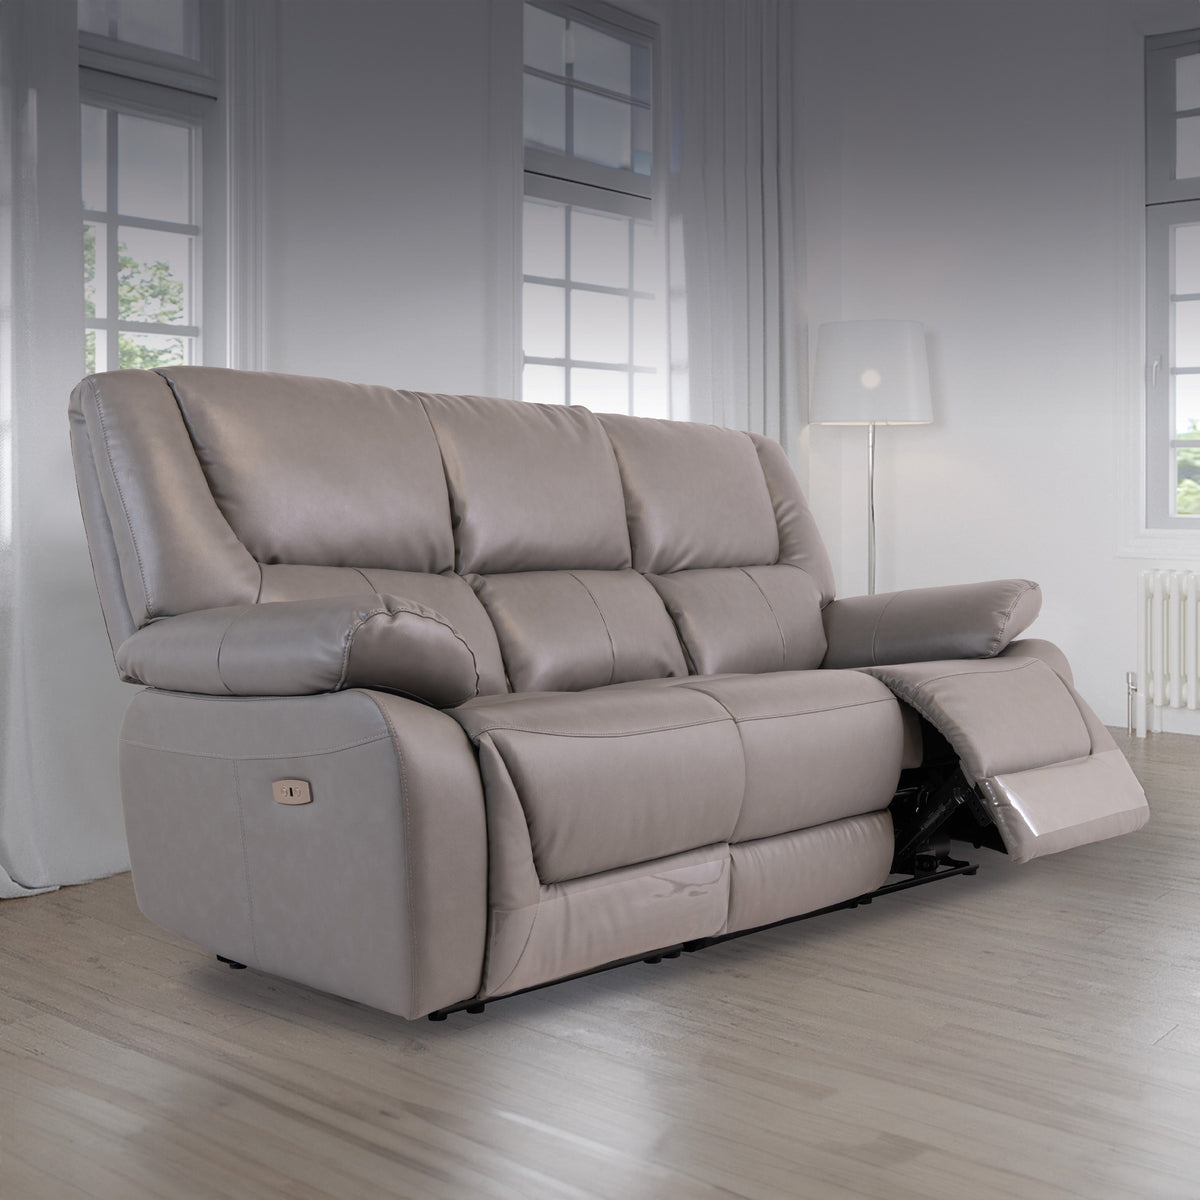 Baxter Charcoal Grey Leather Electric Reclining 3 Seater Couch for living room